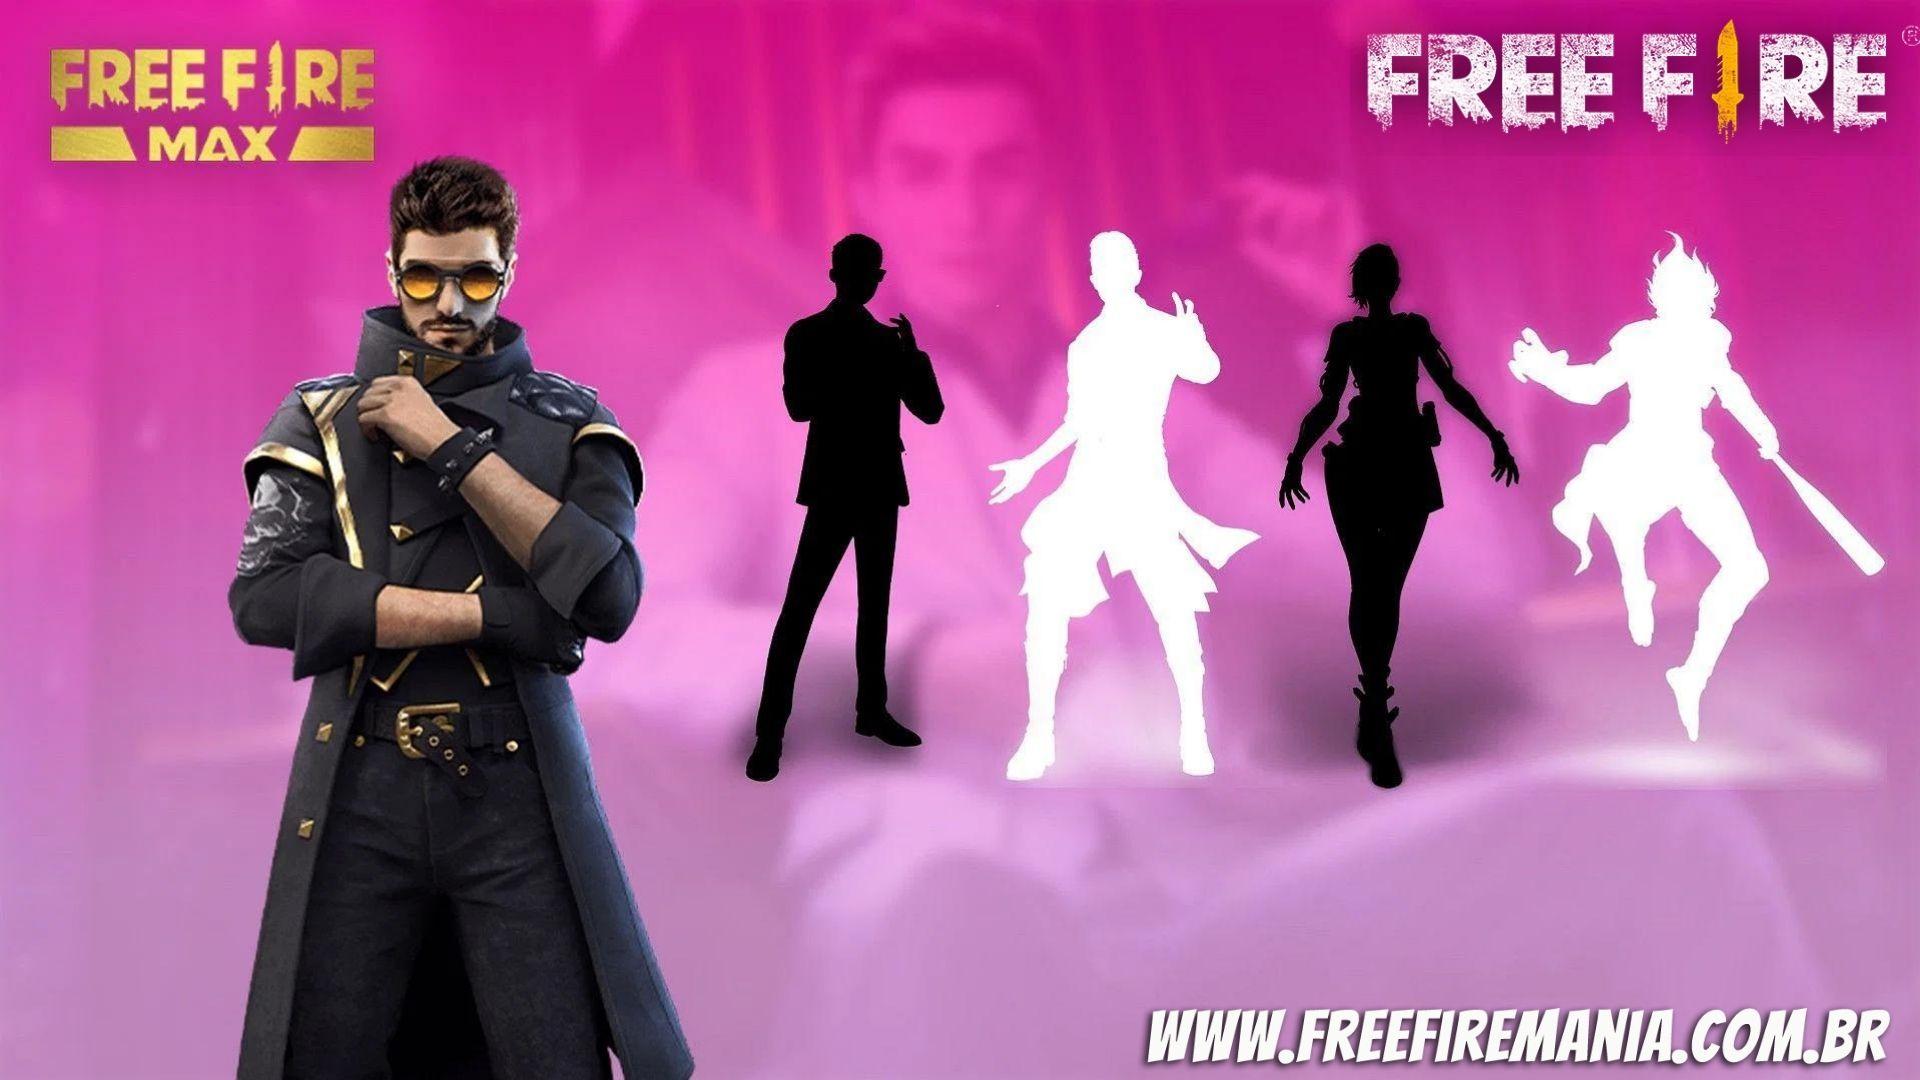 5 best Free Fire characters with active skills [April 2022]